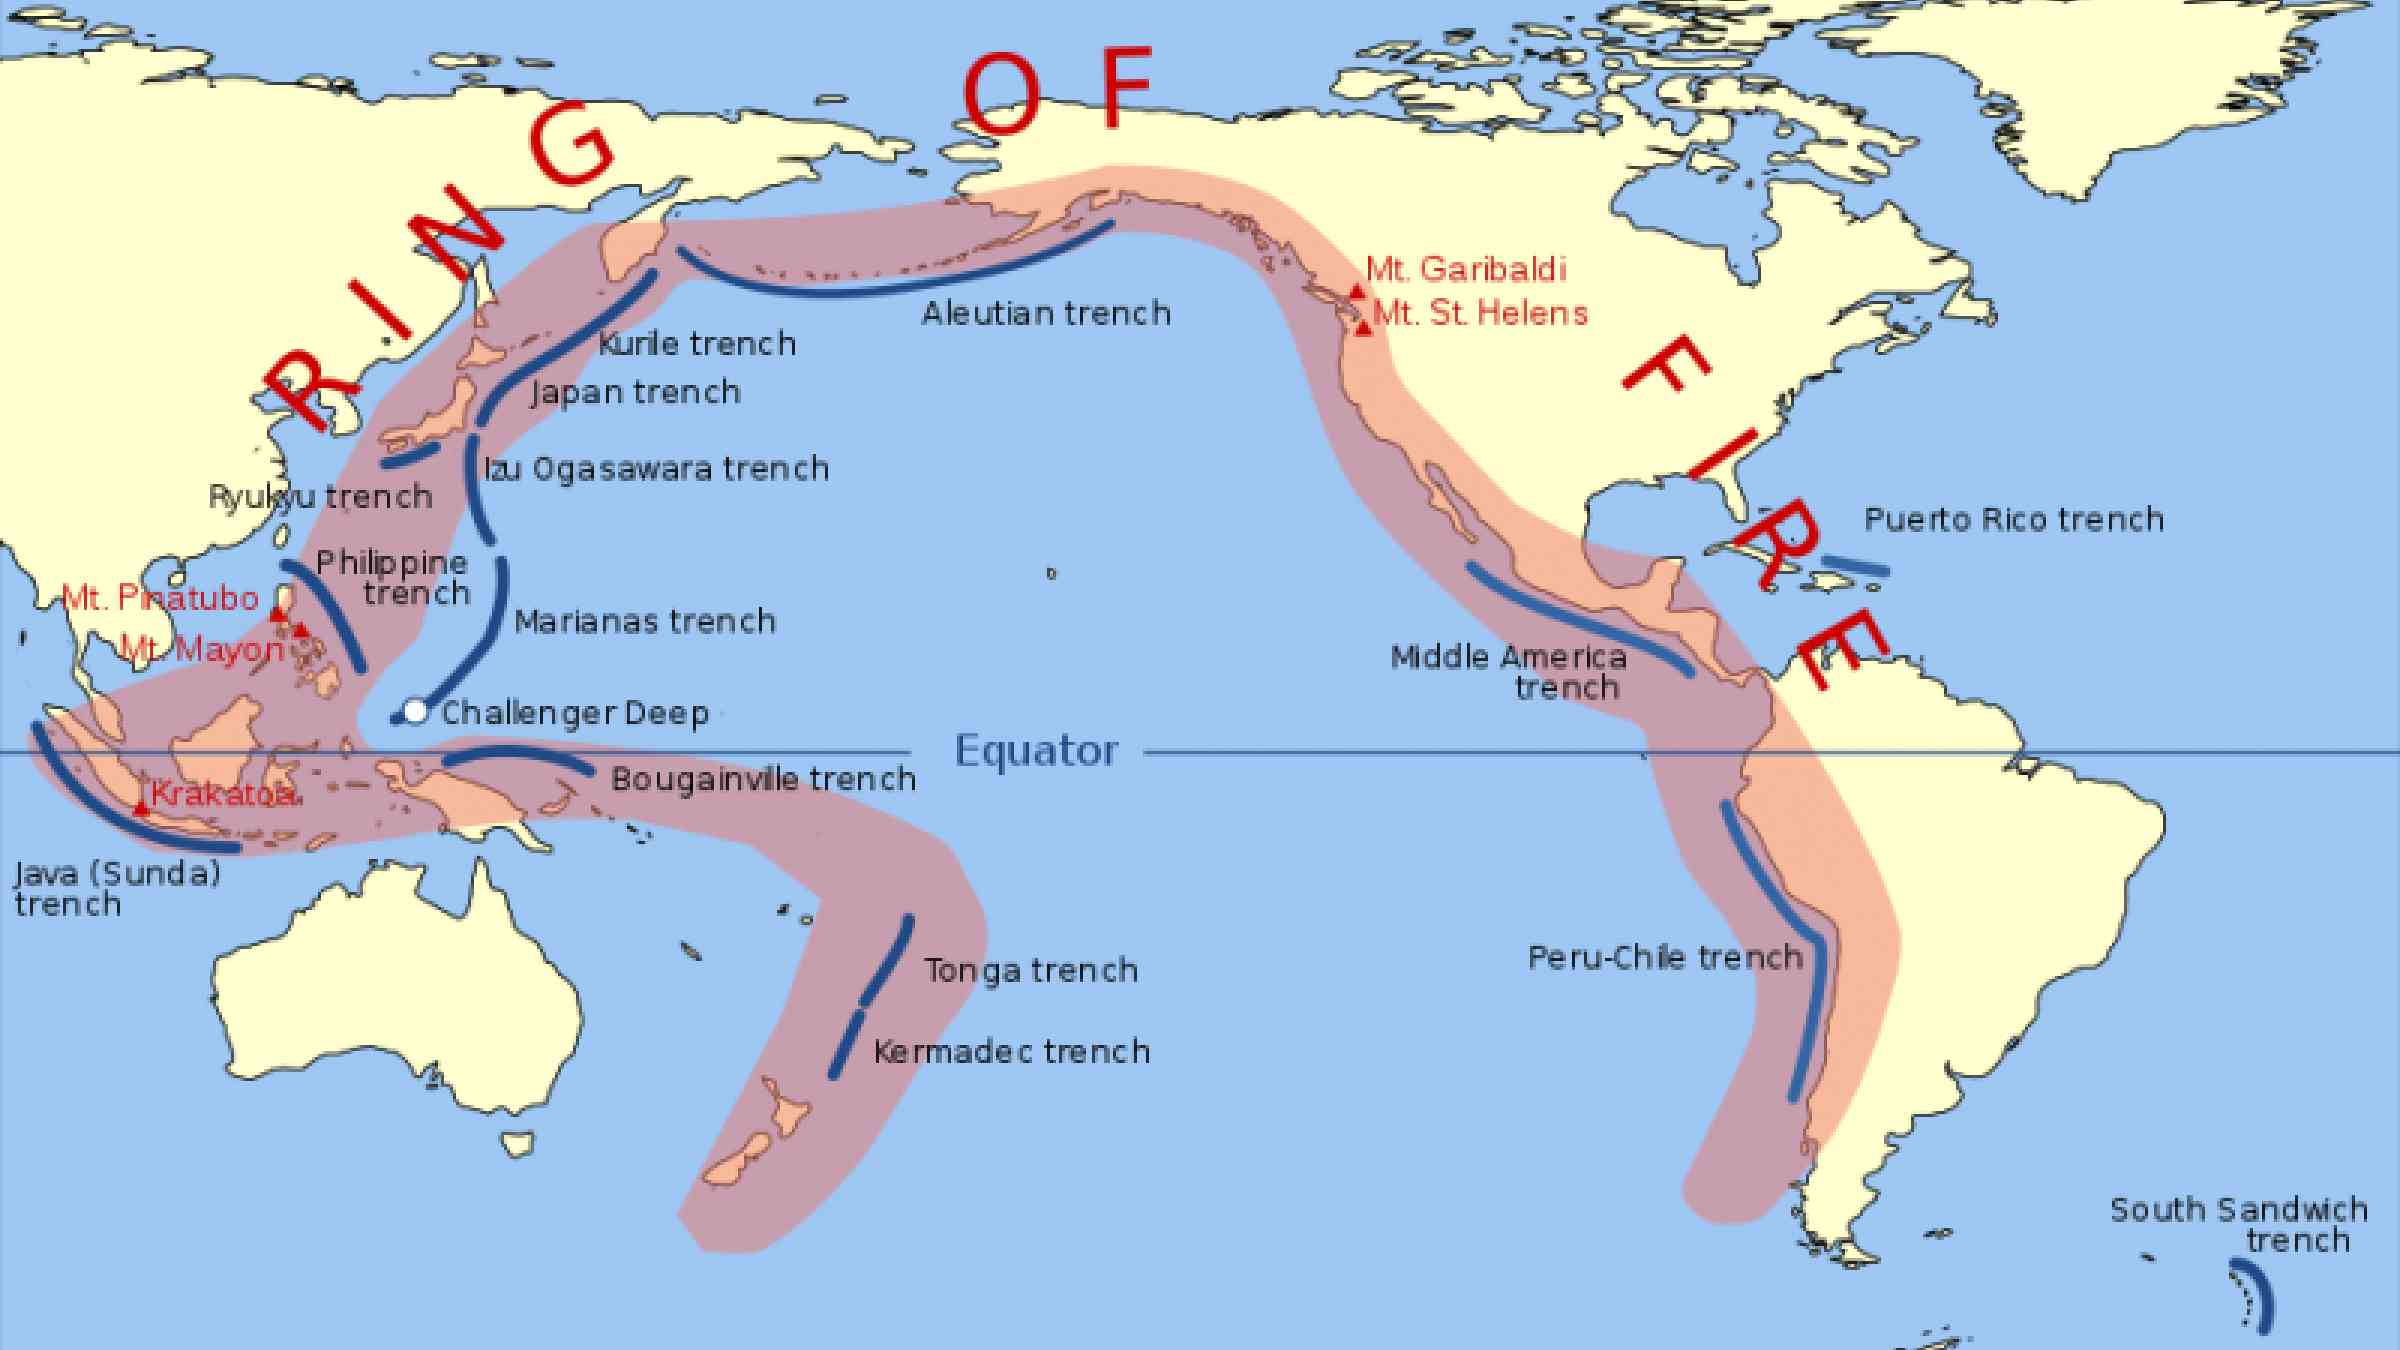 The Pacific's Ring of Fire is the world's most active seismic zone